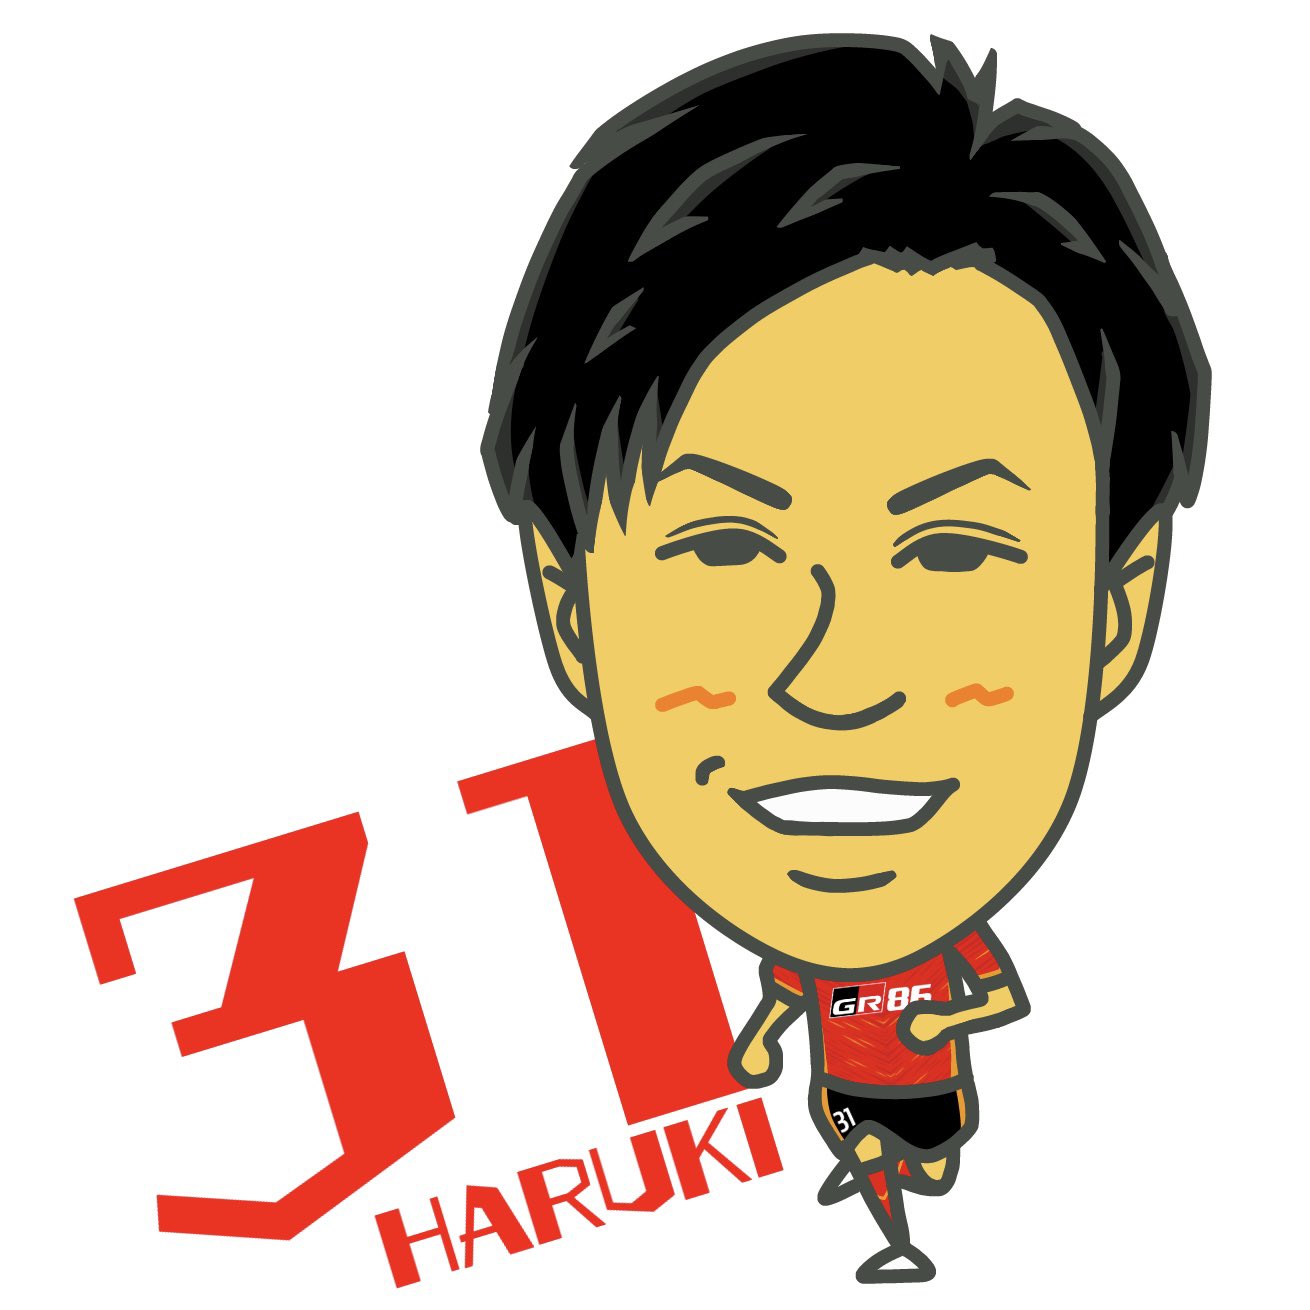 Ajdie はるきくん初スタメン 吉田温紀 名古屋グランパス Grampus T Co P7hs2n1zpl Twitter